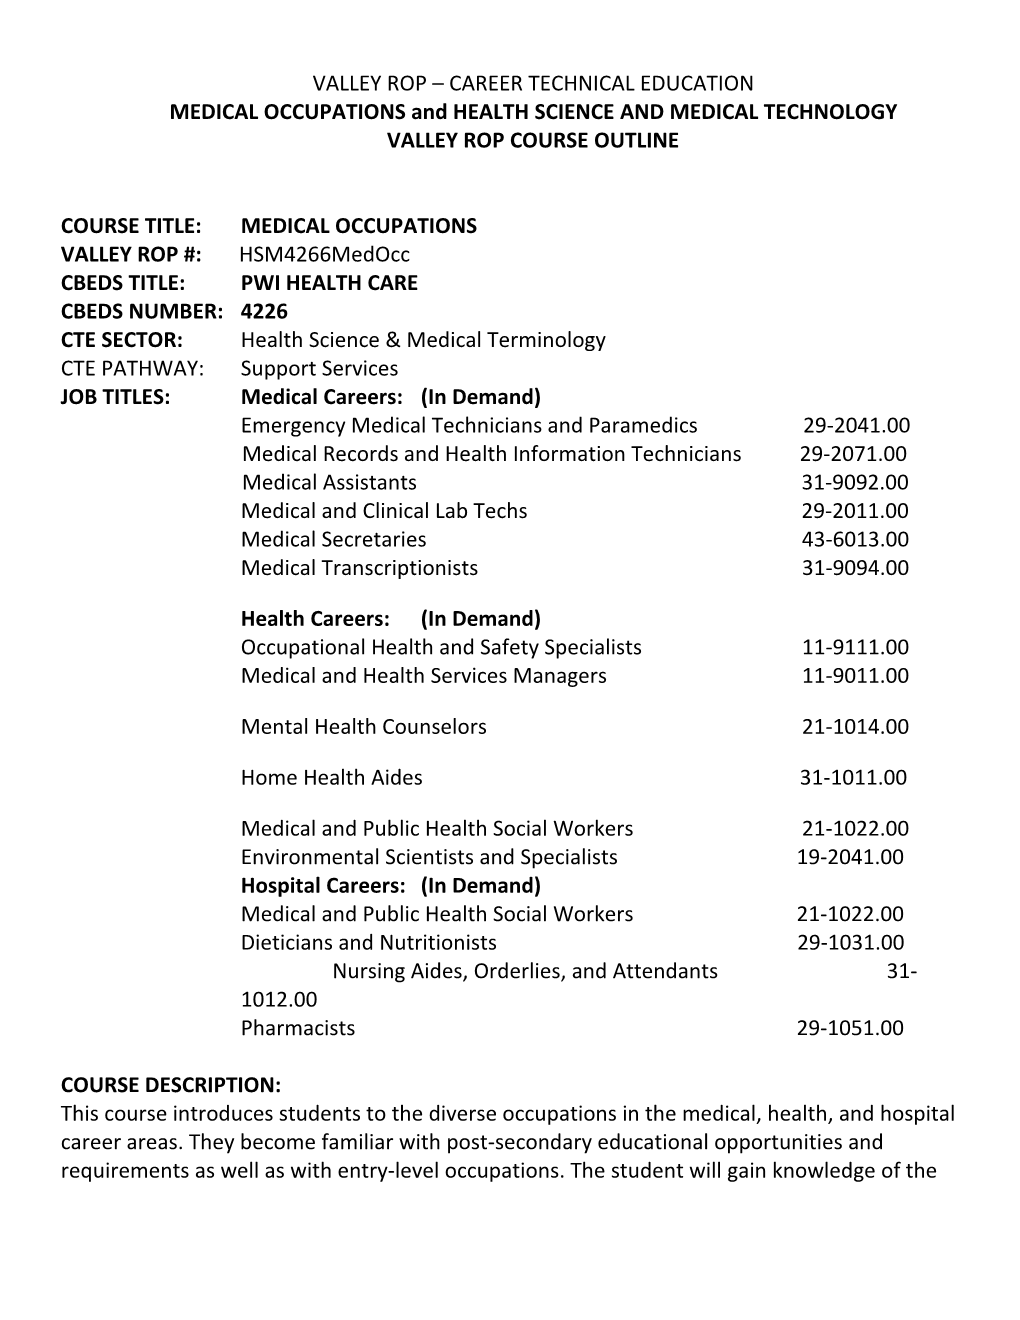 MEDICAL OCCUPATIONS and HEALTH SCIENCE and MEDICAL TECHNOLOGY